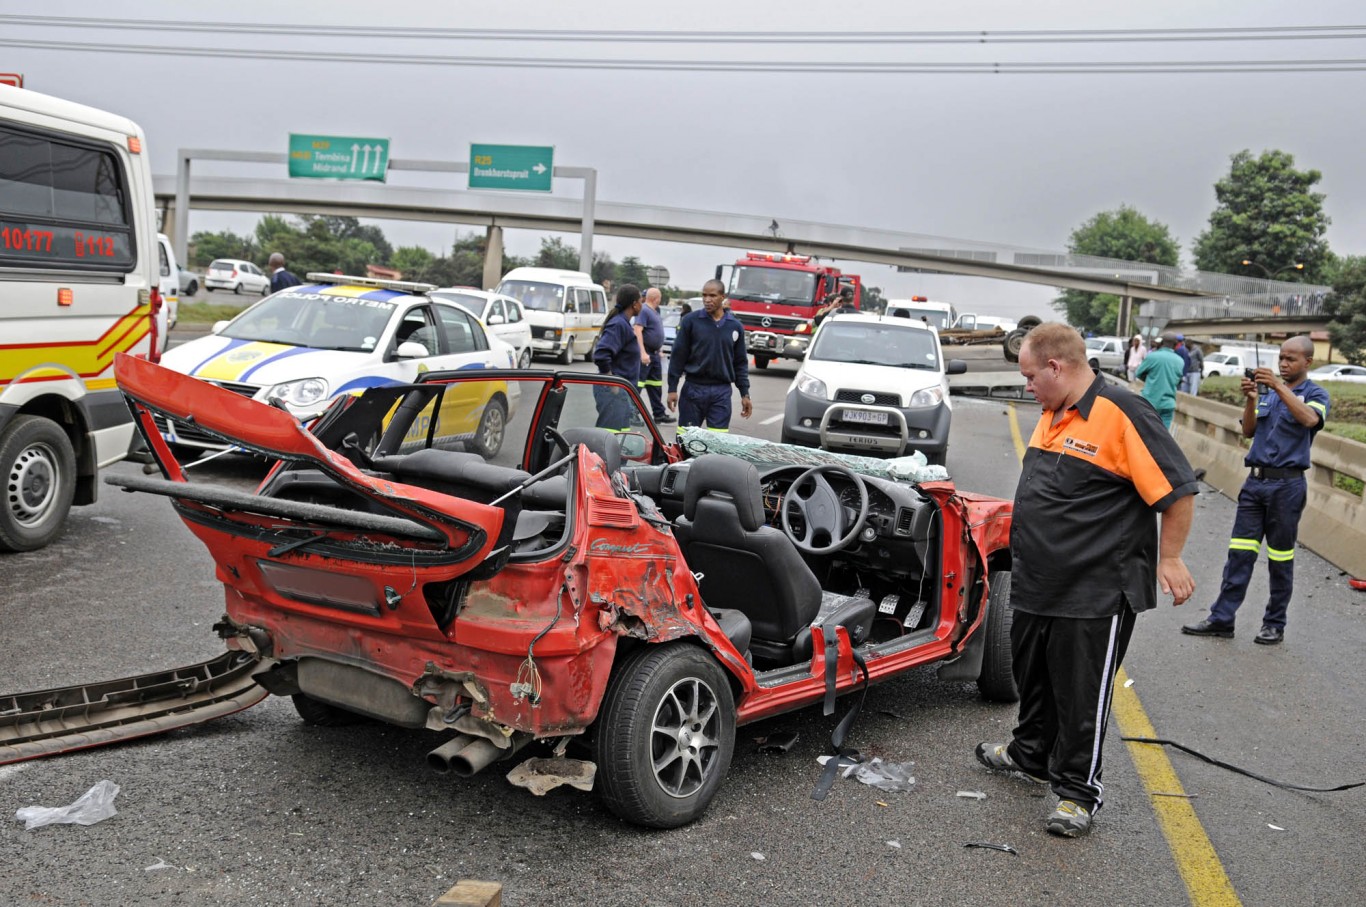 Female (21) critically injured in Kempton Accident | Road Safety Blog